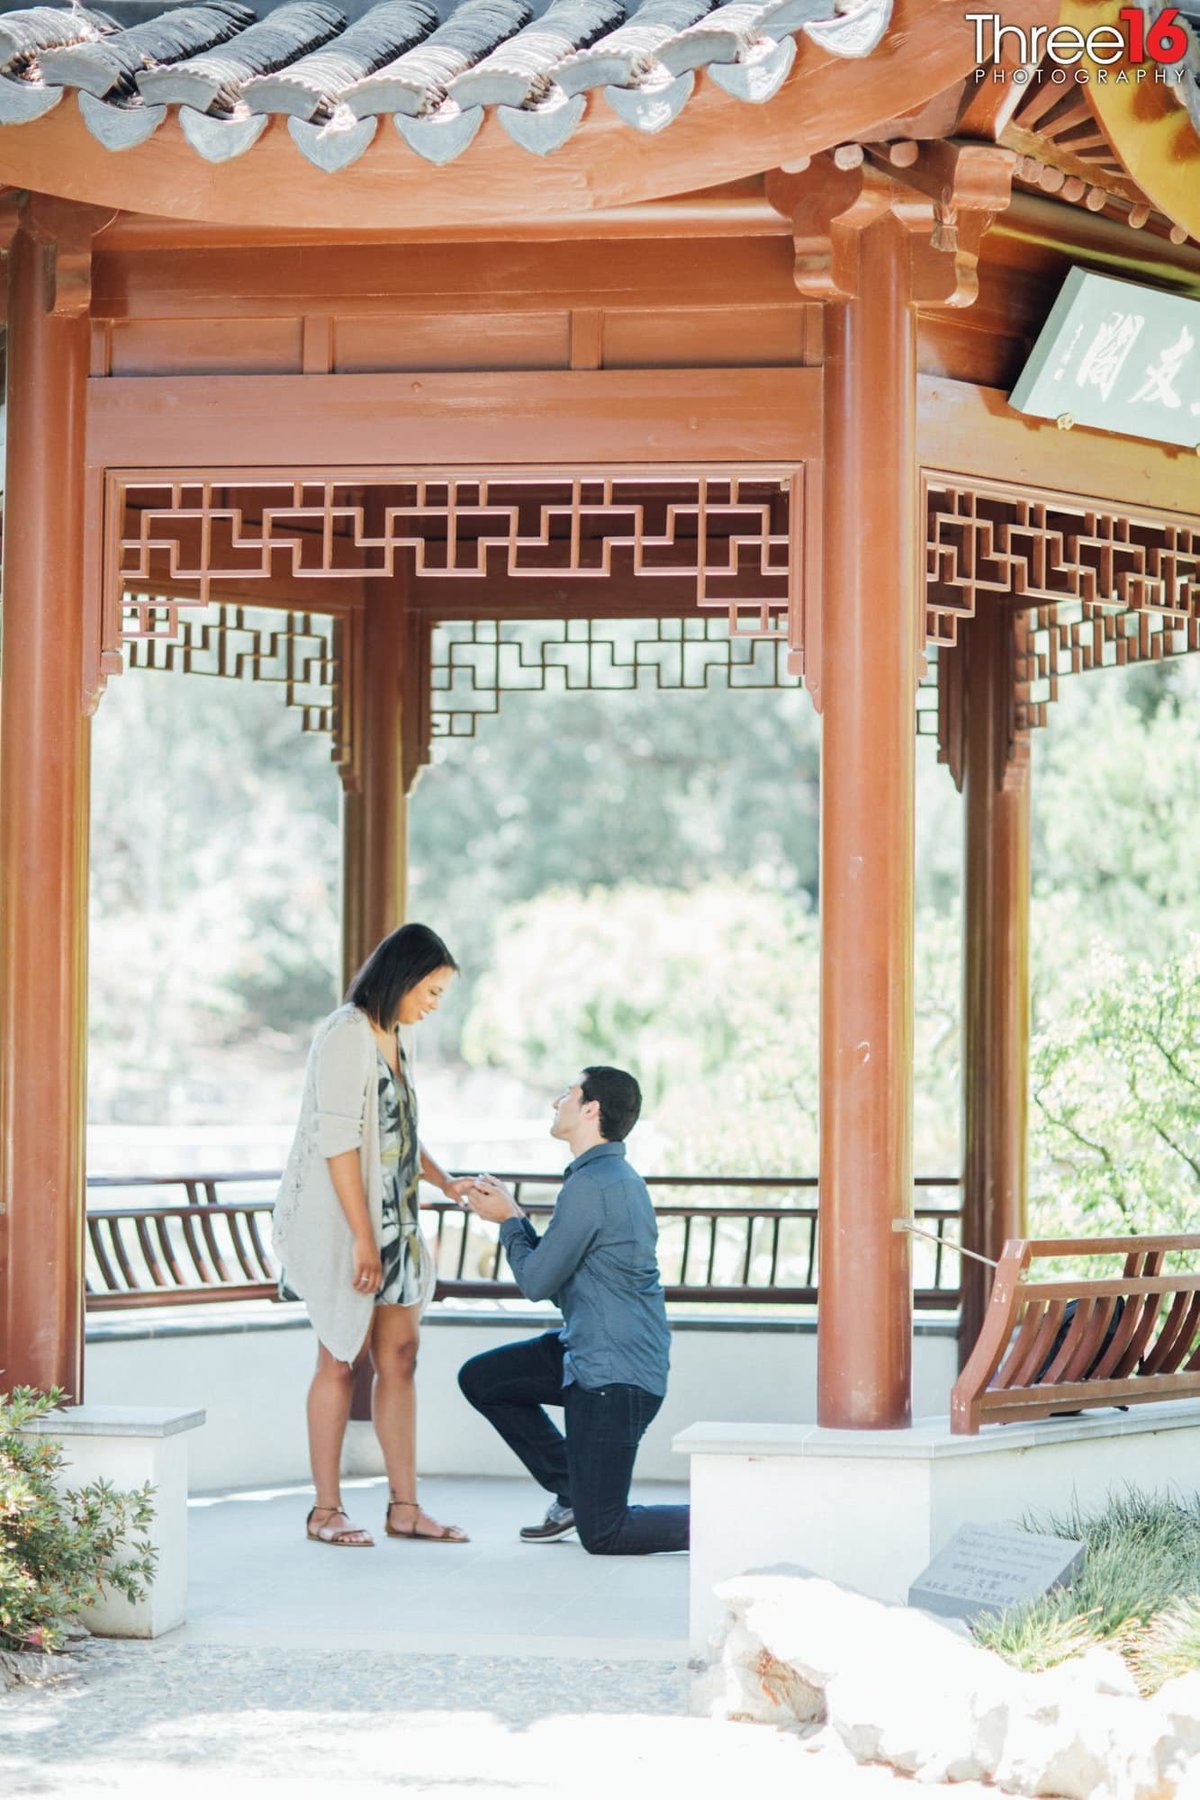 Groom to be gets down on one knee to propose marriage in the gazebo at The Huntington Library & Gardens